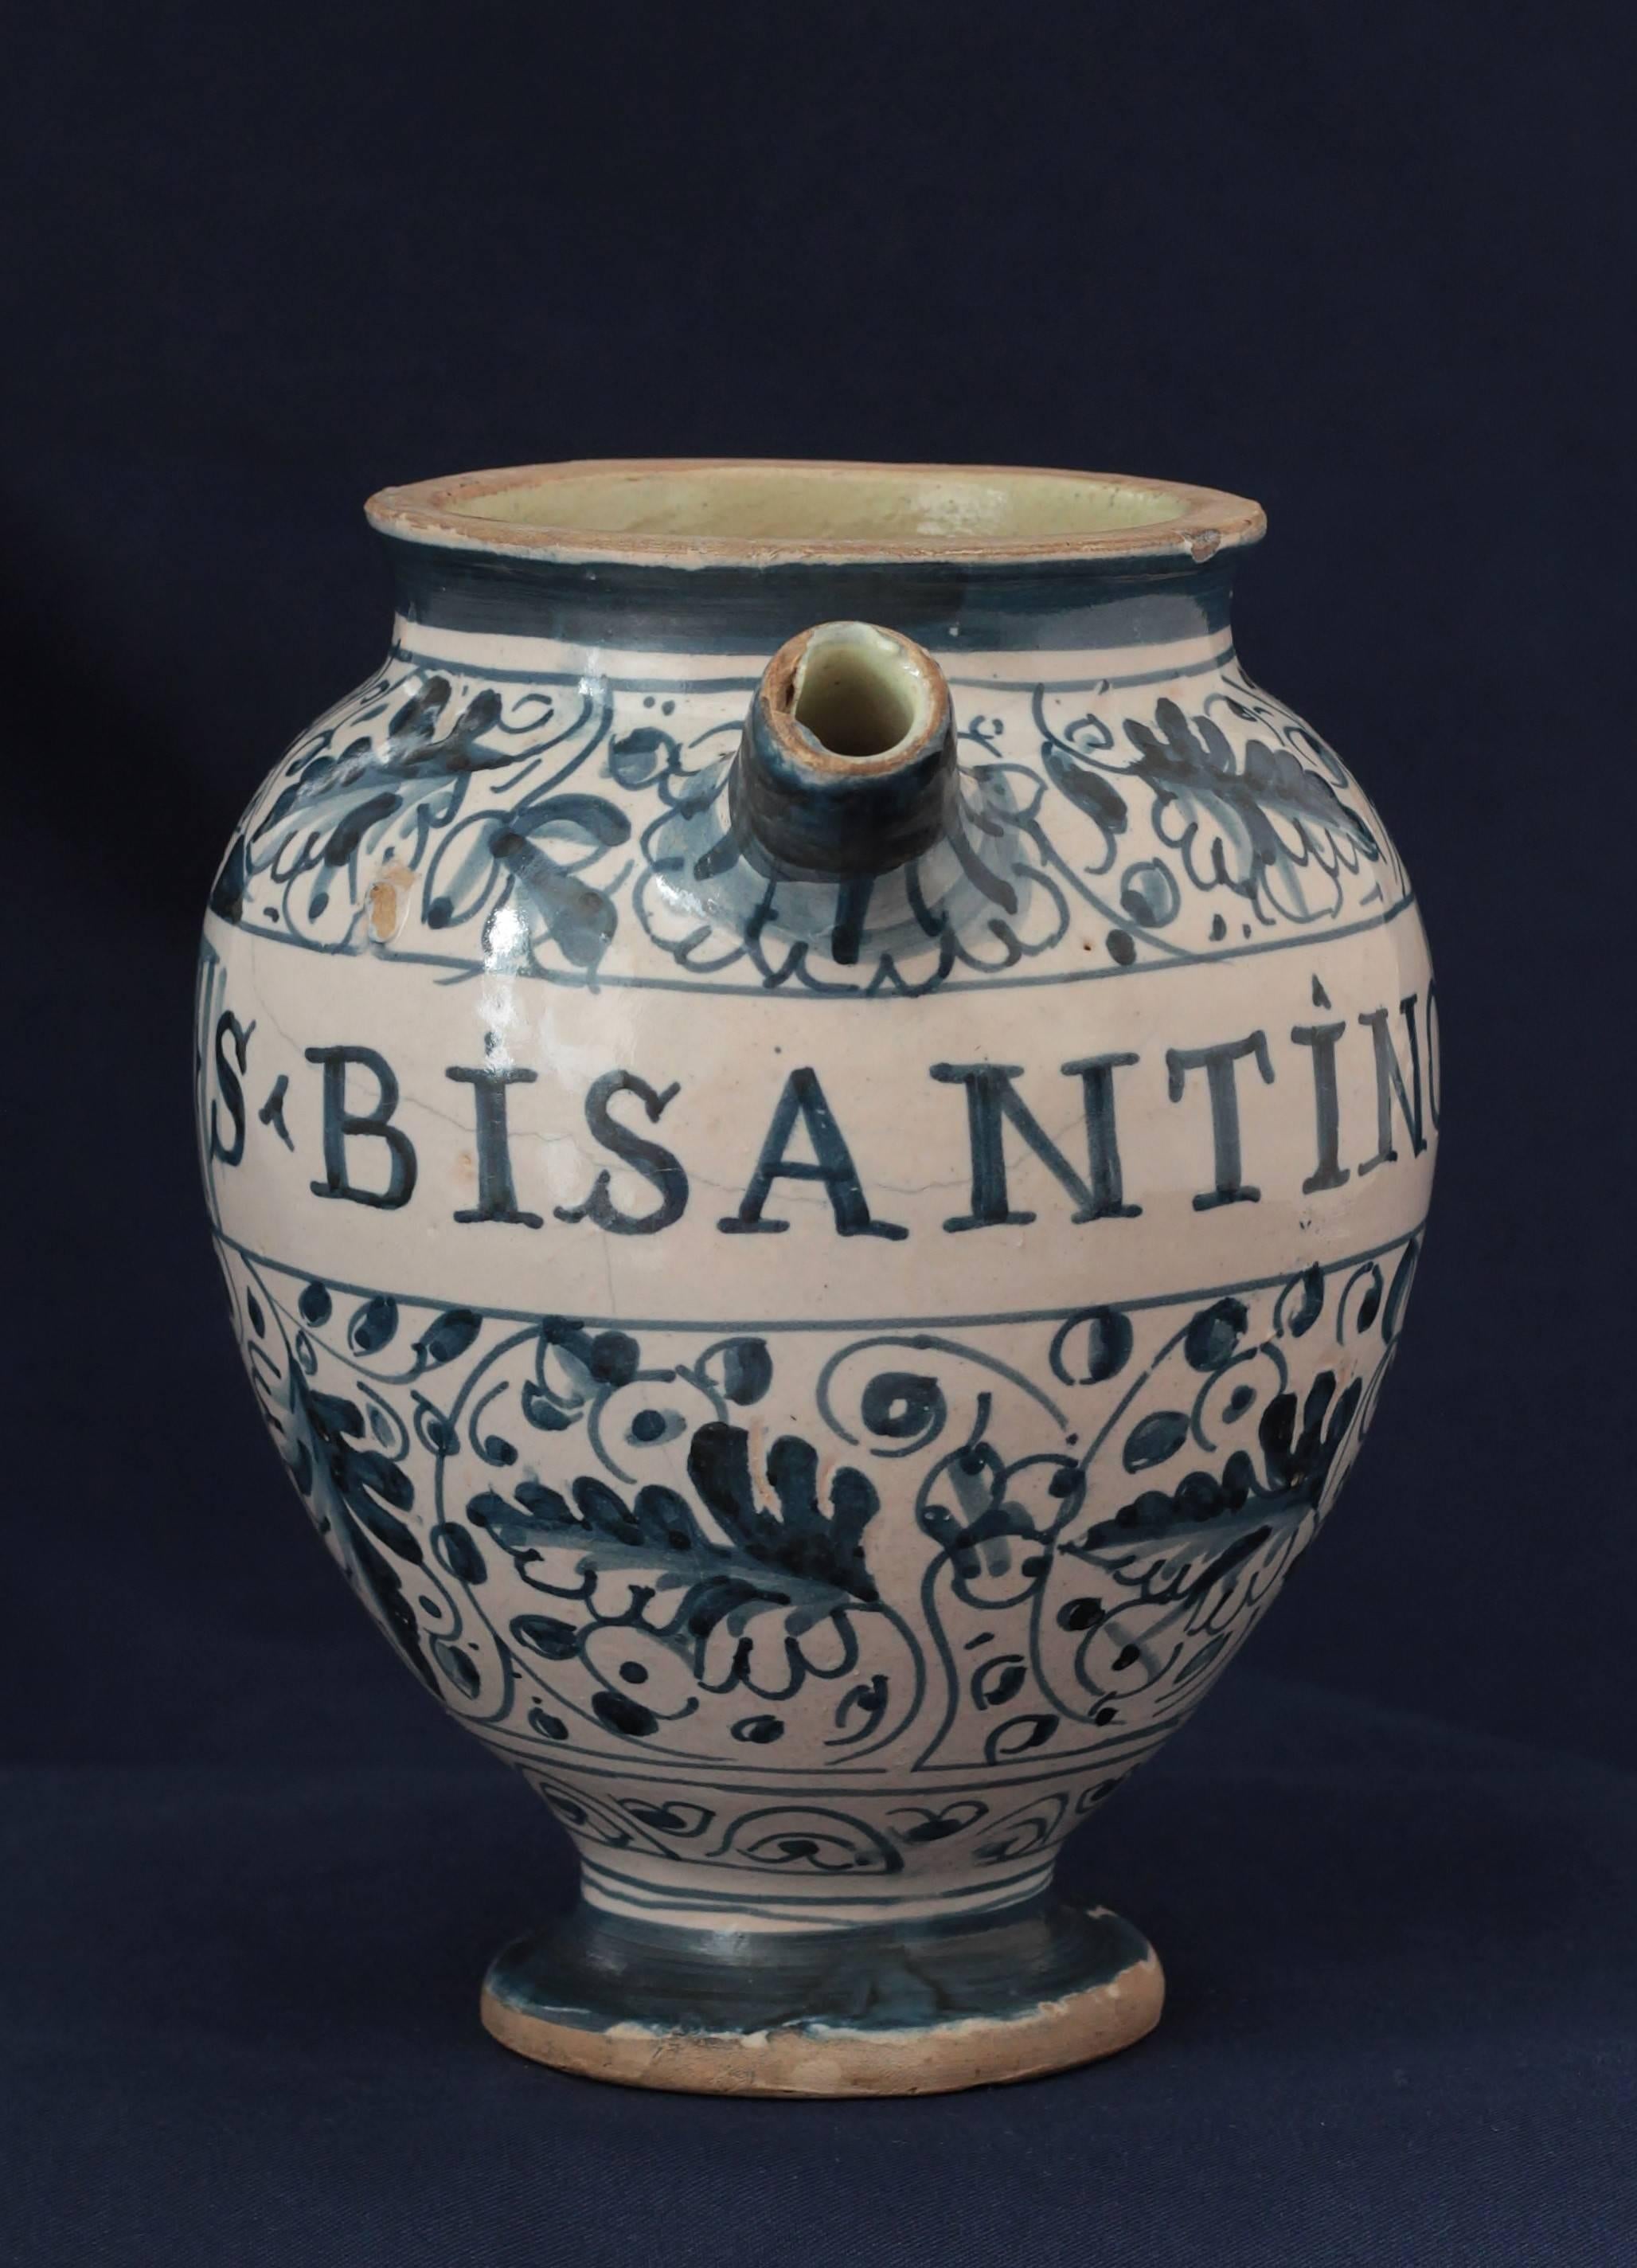 A Montelupo (Italy) majolica chevrette with shades of blue decoration with foliages and leaves. Apothecary inscription: “S.BISANTINO.S”. 17th century.
Craquelure and lacks of enamel visibles.
Measures: Height 15.8 cm, diameter 18 cm - small